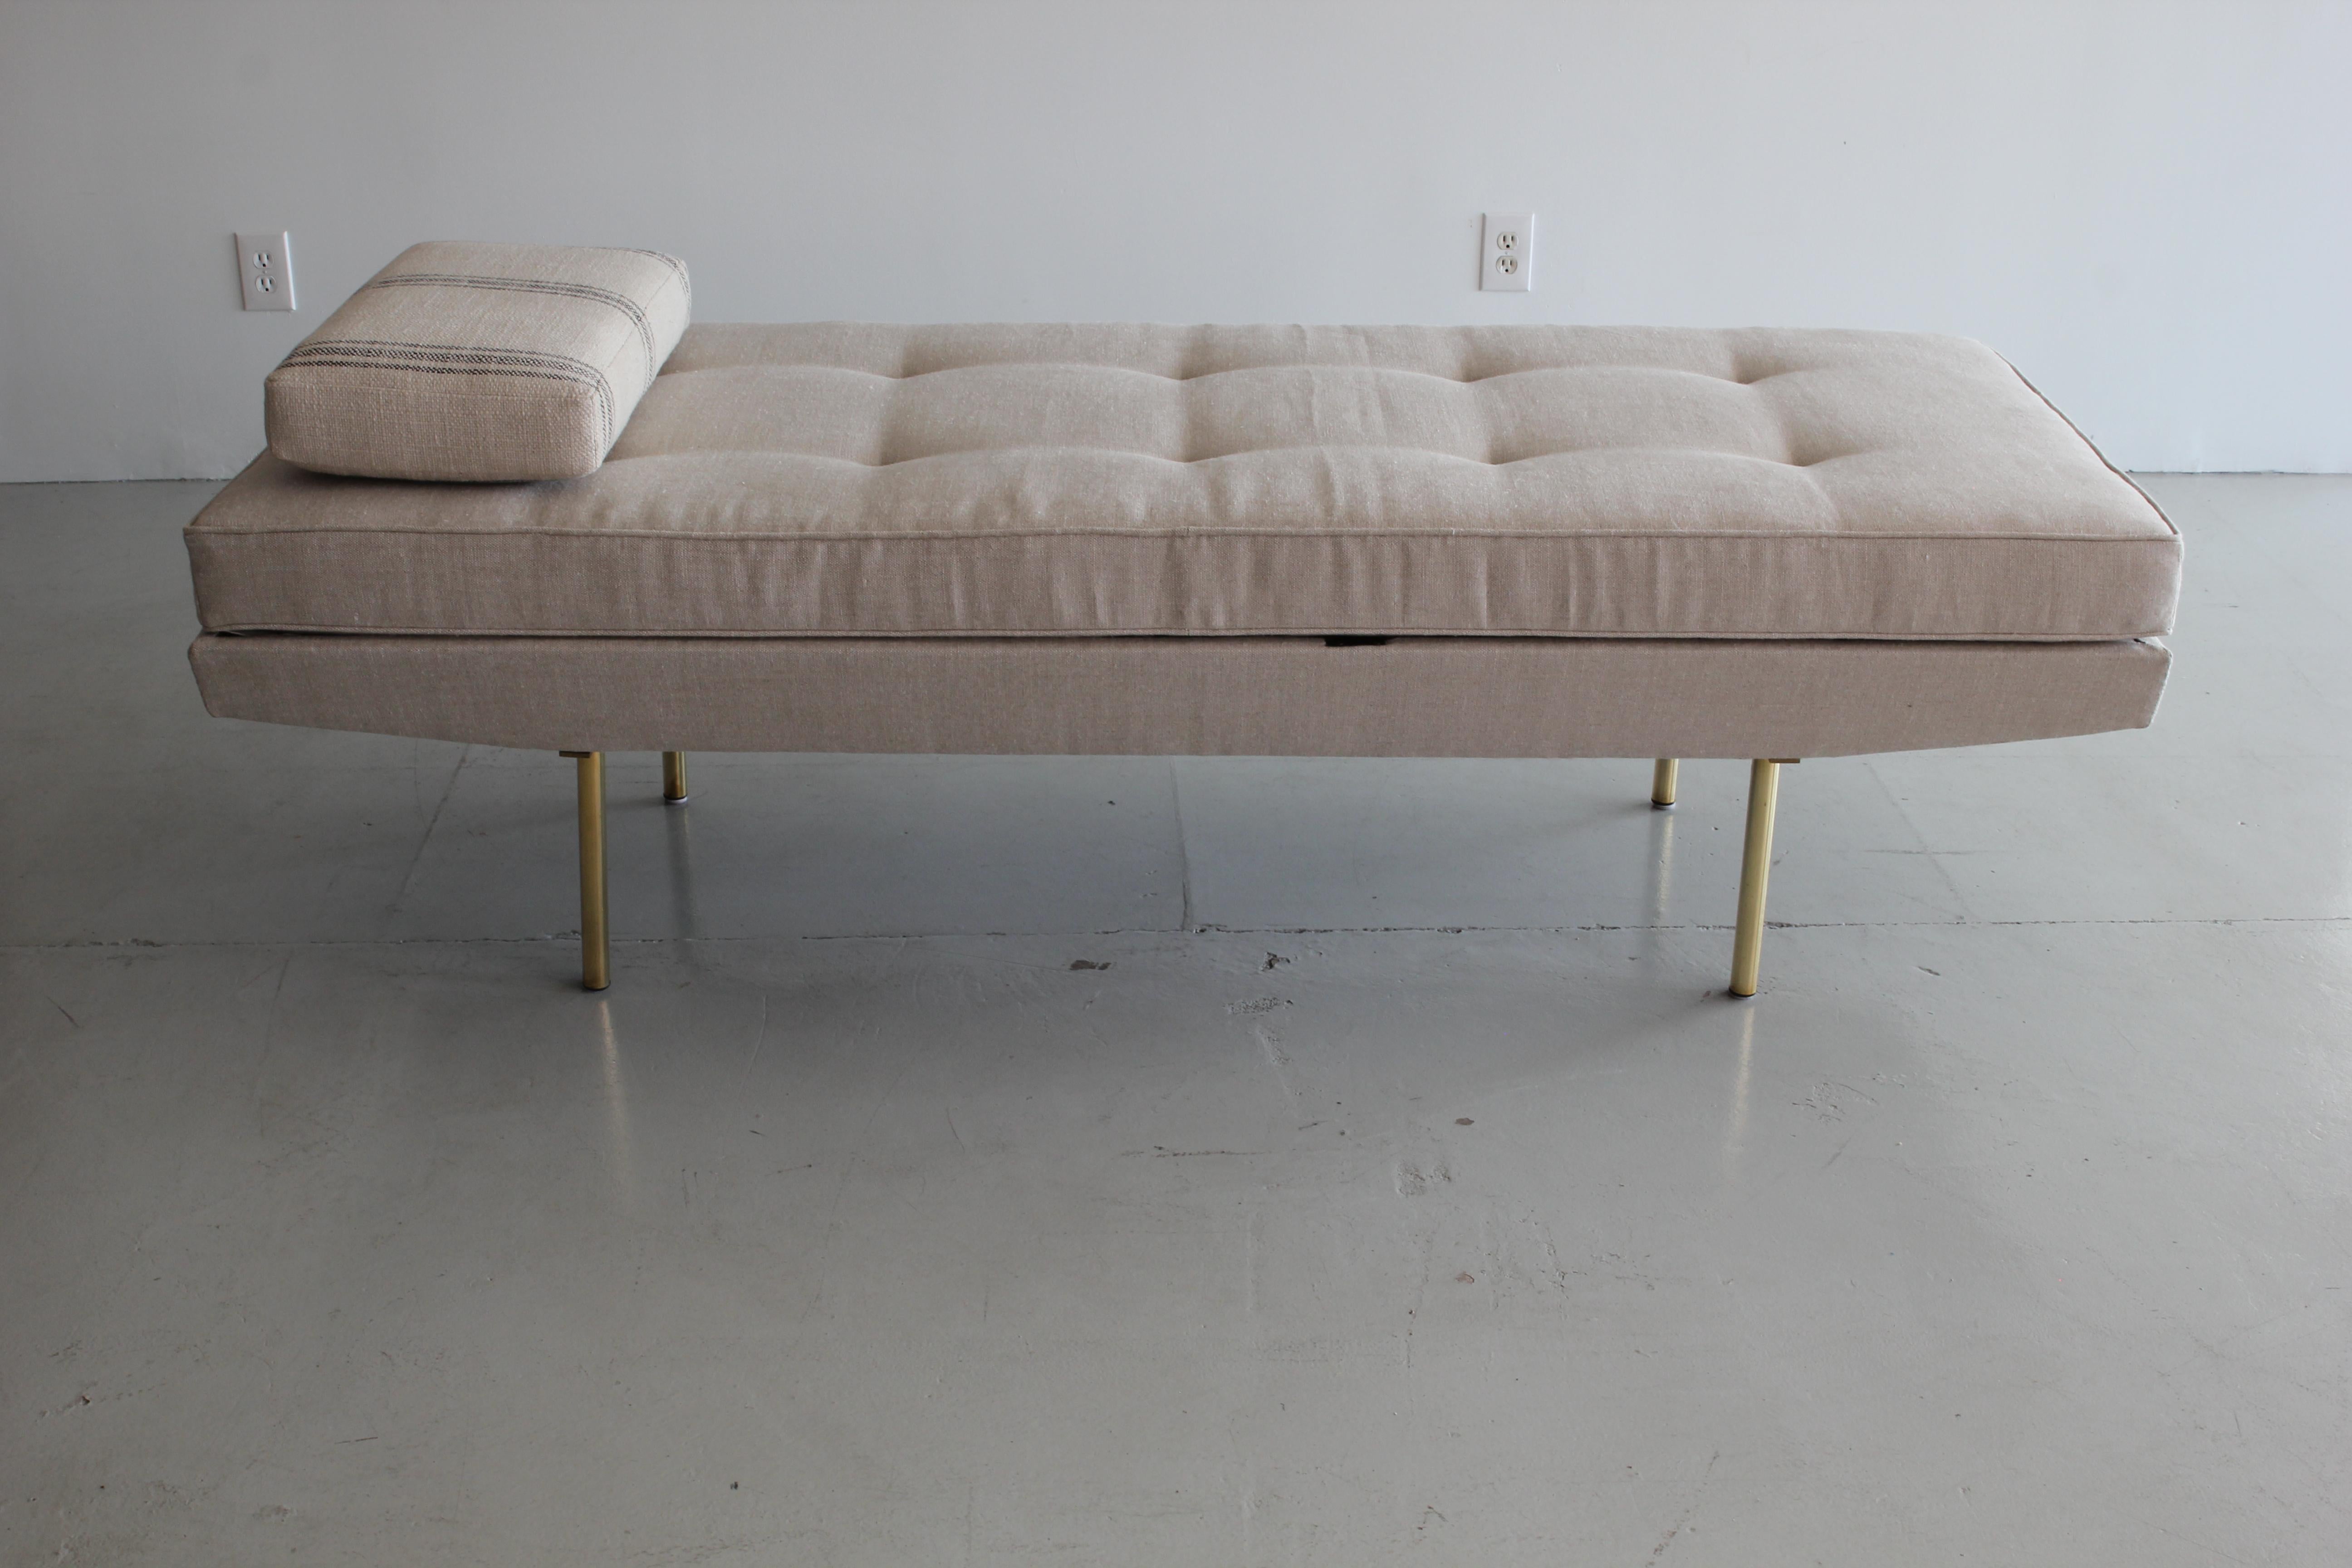 A Mid-Century Modern Italian upholstered mechanical daybed with cushion supported on straight brass legs, circa 1960.
Can articulate up to seating chaise.
Newly upholstered in natural linen.